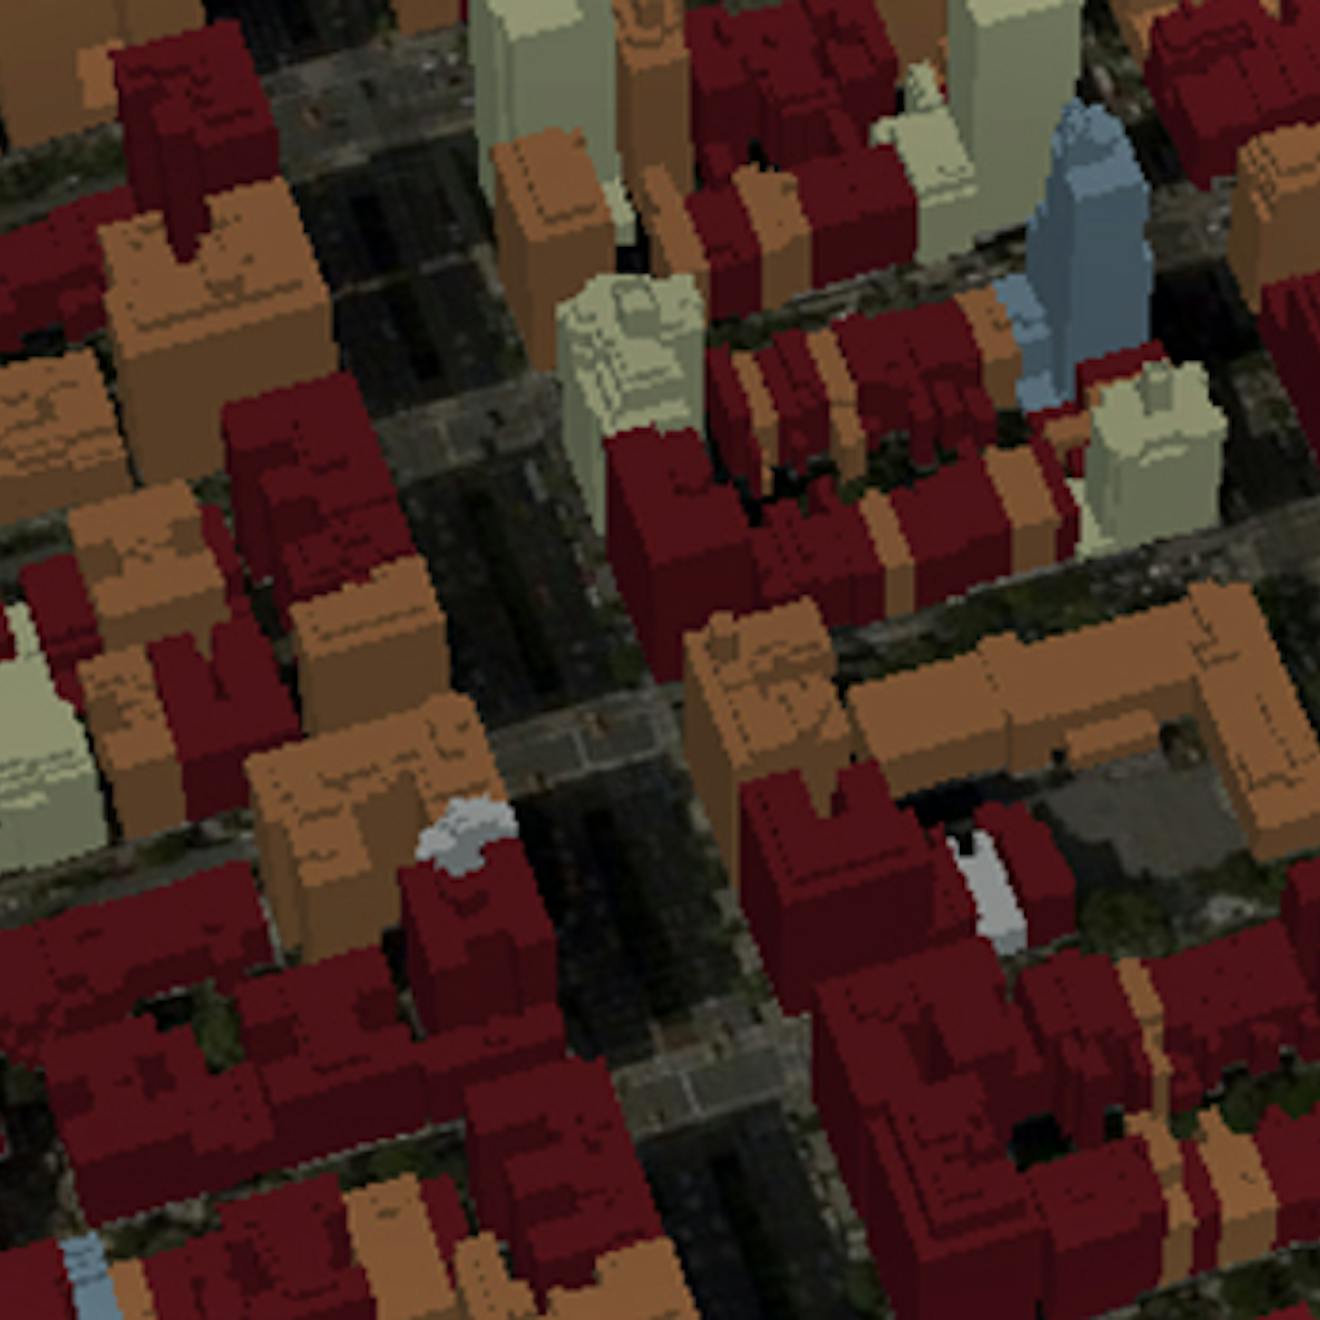 An aerial view of untextured models of 3D buildings, colored by year they were built